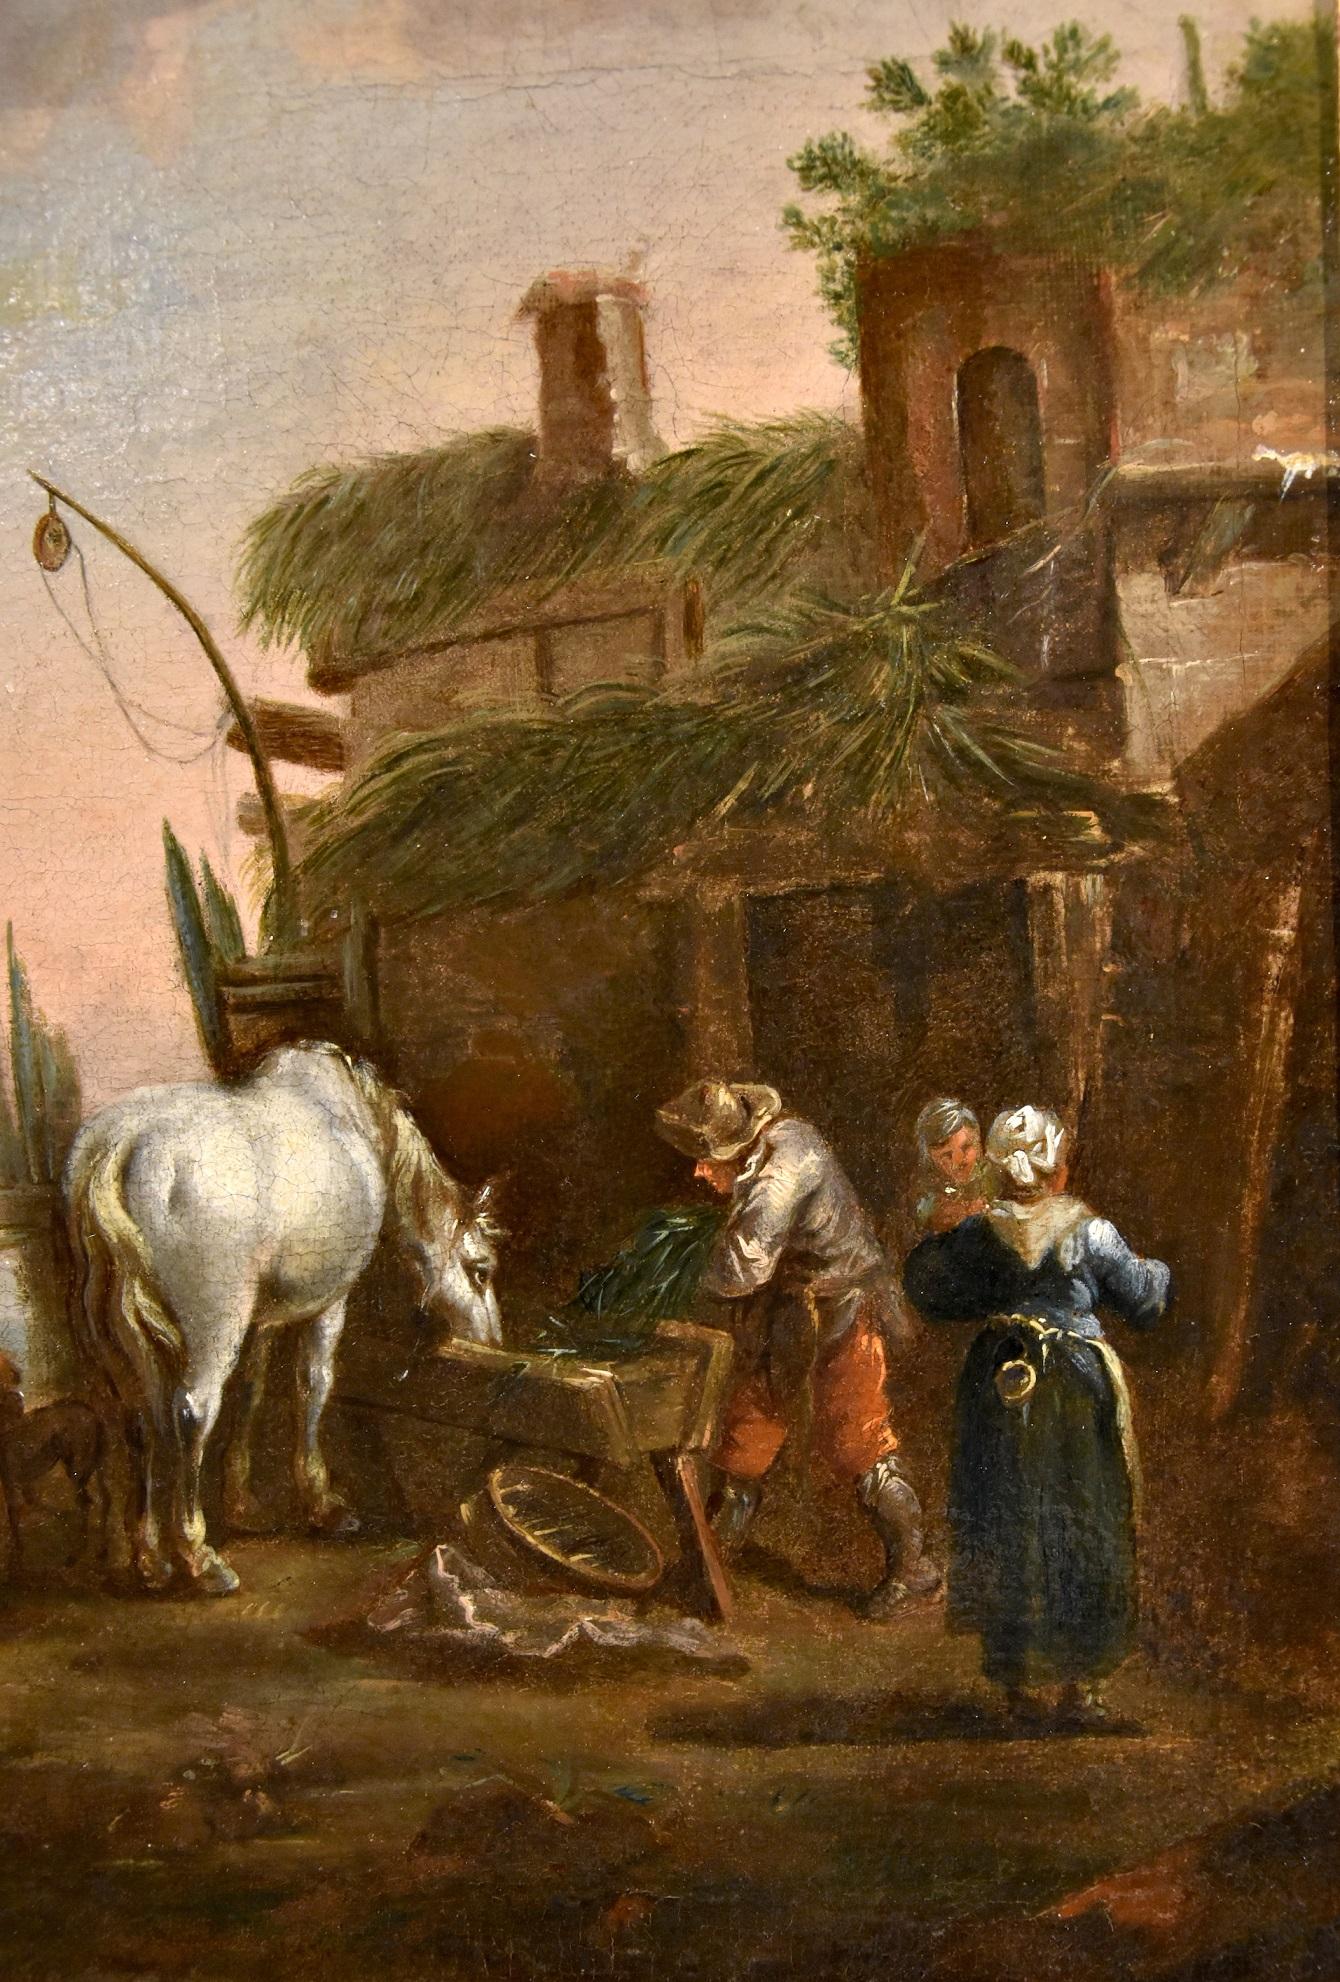 After Simon Johannes van Douw (Antwerp c. 1630 - c. 1677) 
The stop of a traveler on horseback near a post station

Oil painting on canvas
45 x 55 cm
In frame cm. 55 x 65

In this pleasant painting, depicting a knight parked near a post station, the